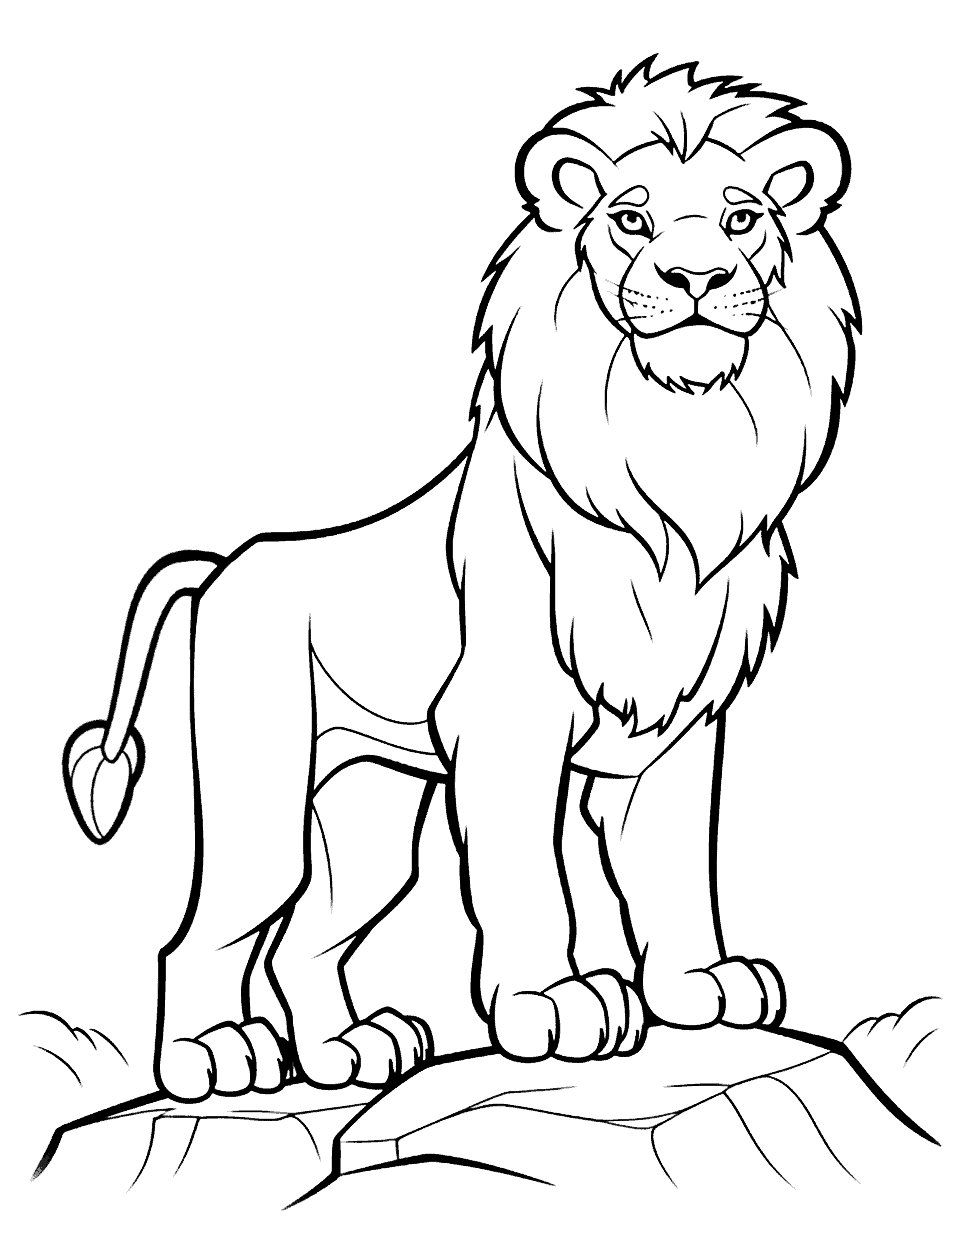 Lion King Animal Coloring Page - A lion standing on a rocky outcrop, looking regal and powerful.